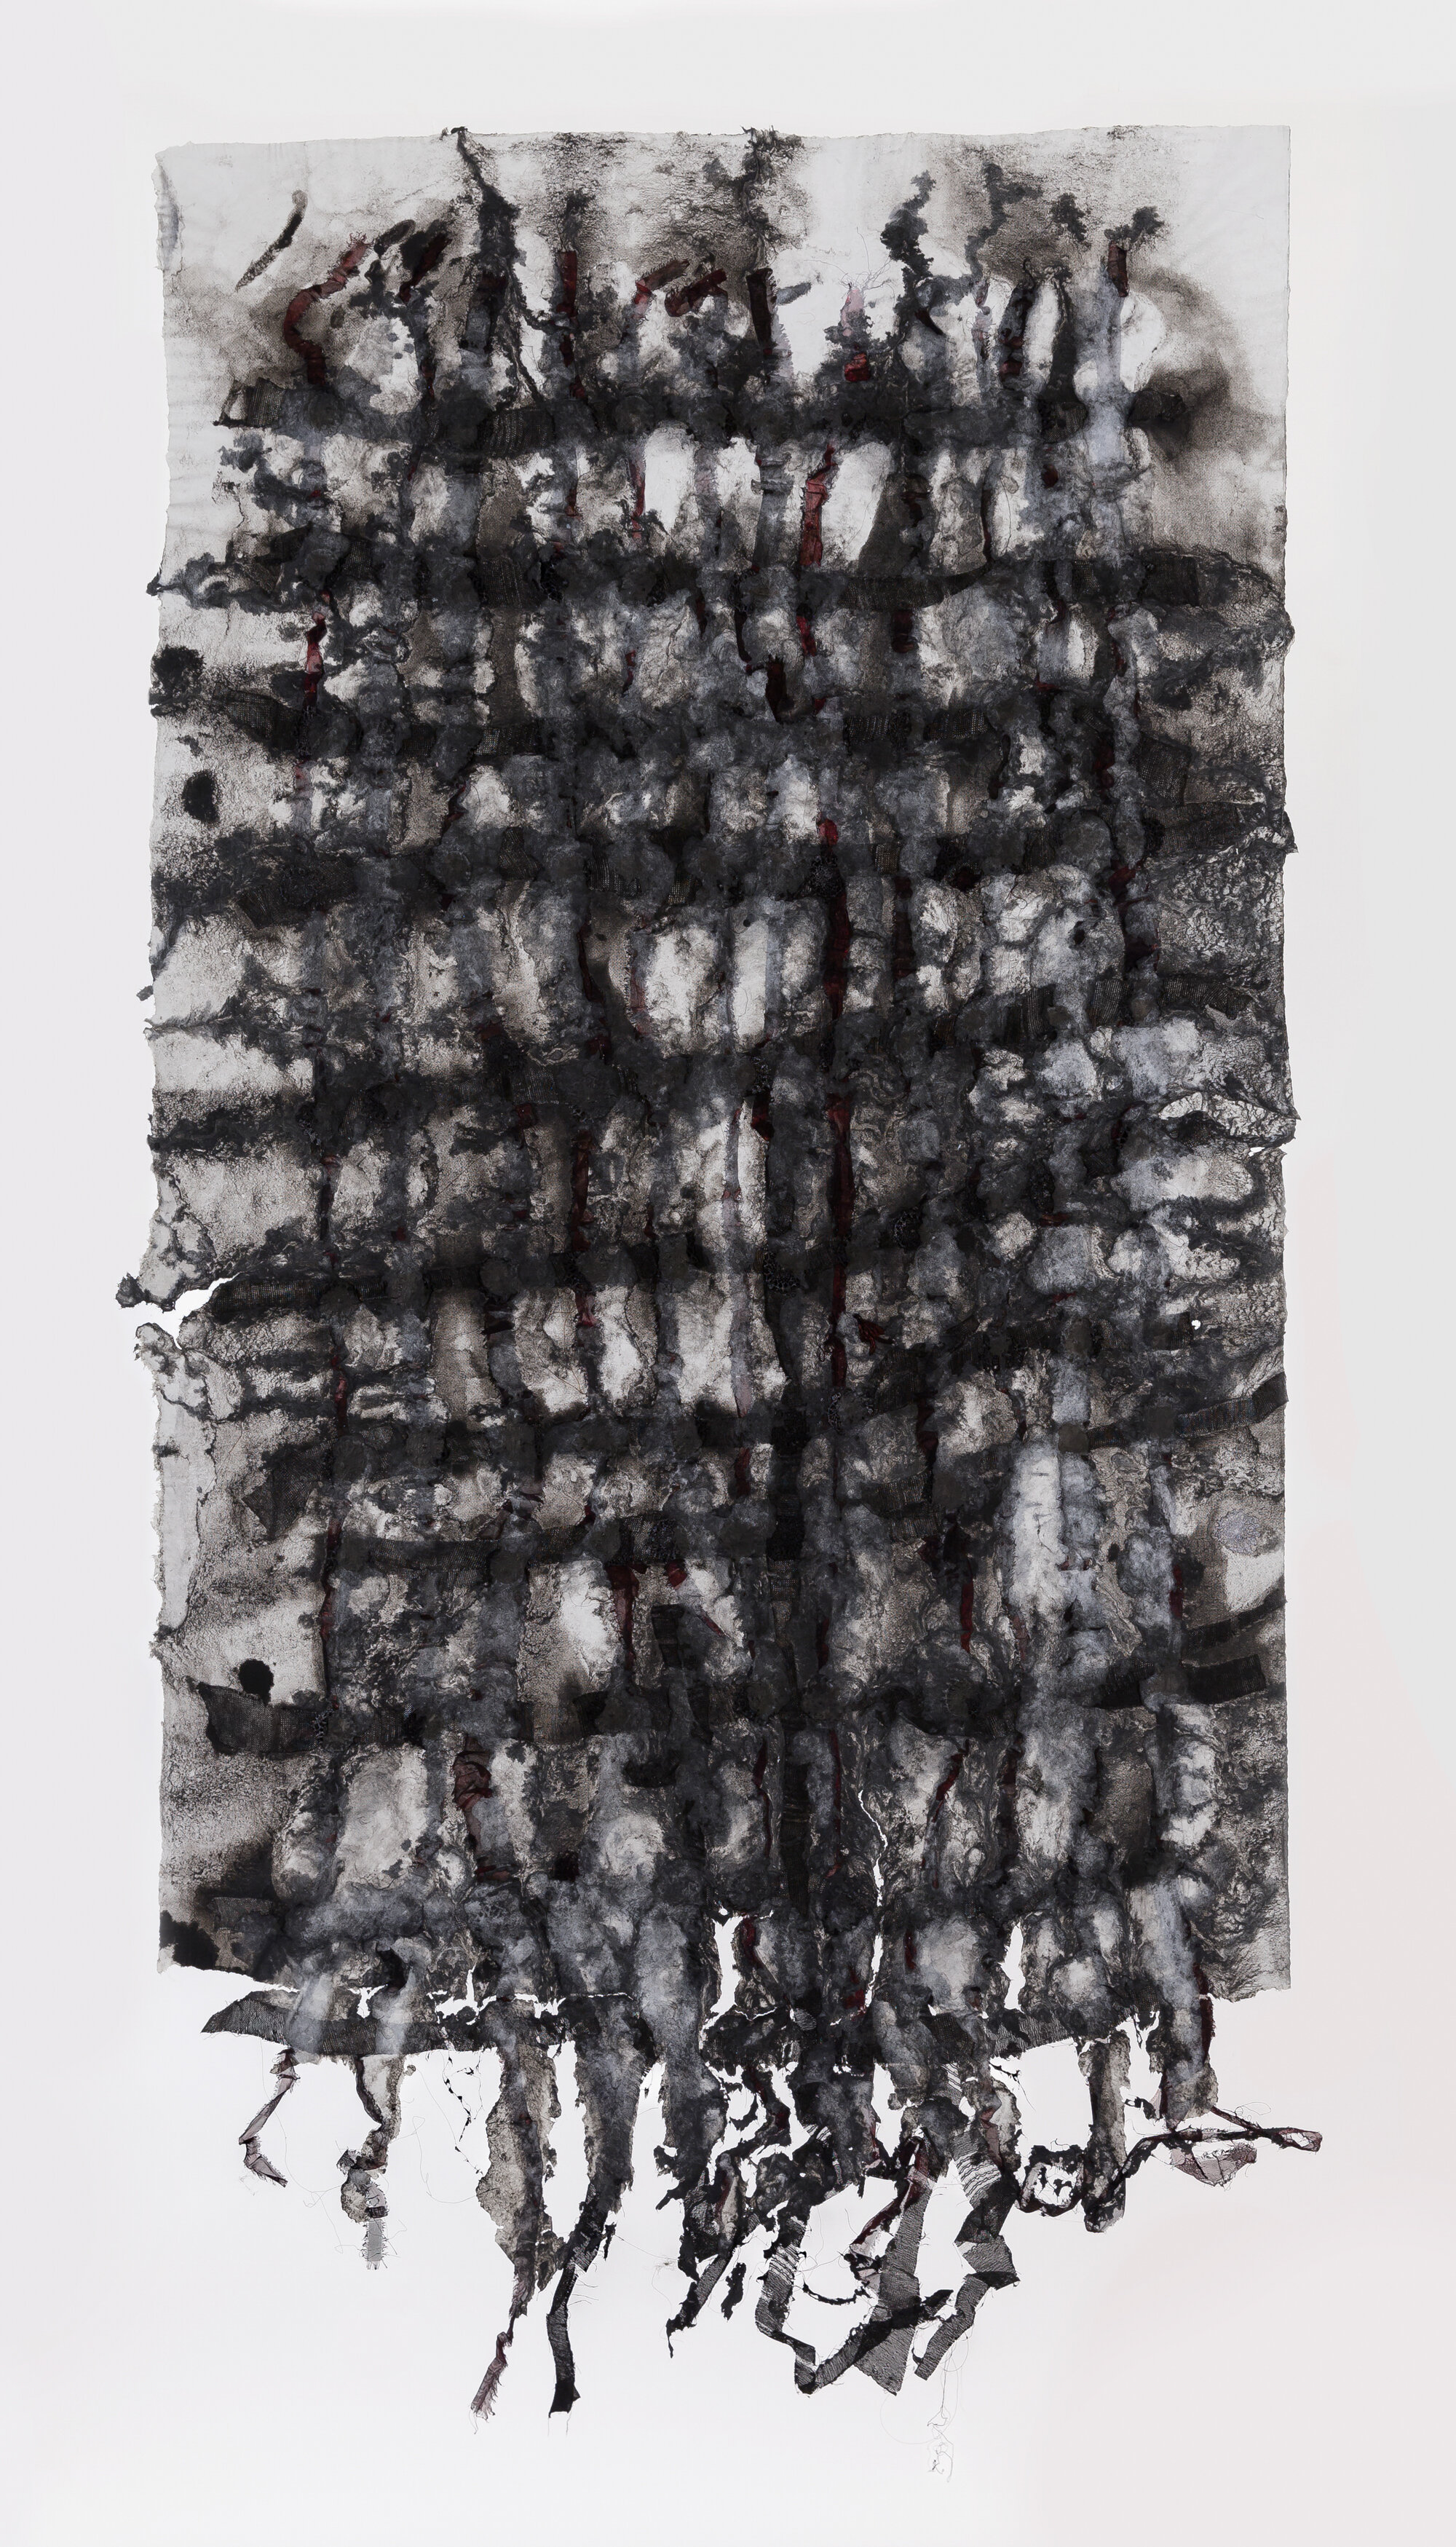   Untitled , 2013 Fabric, pigment, and linen handmade paper 36.25 x 18.75 in. Framed Dimensions: 41.125 x 23.875 x 2 in 